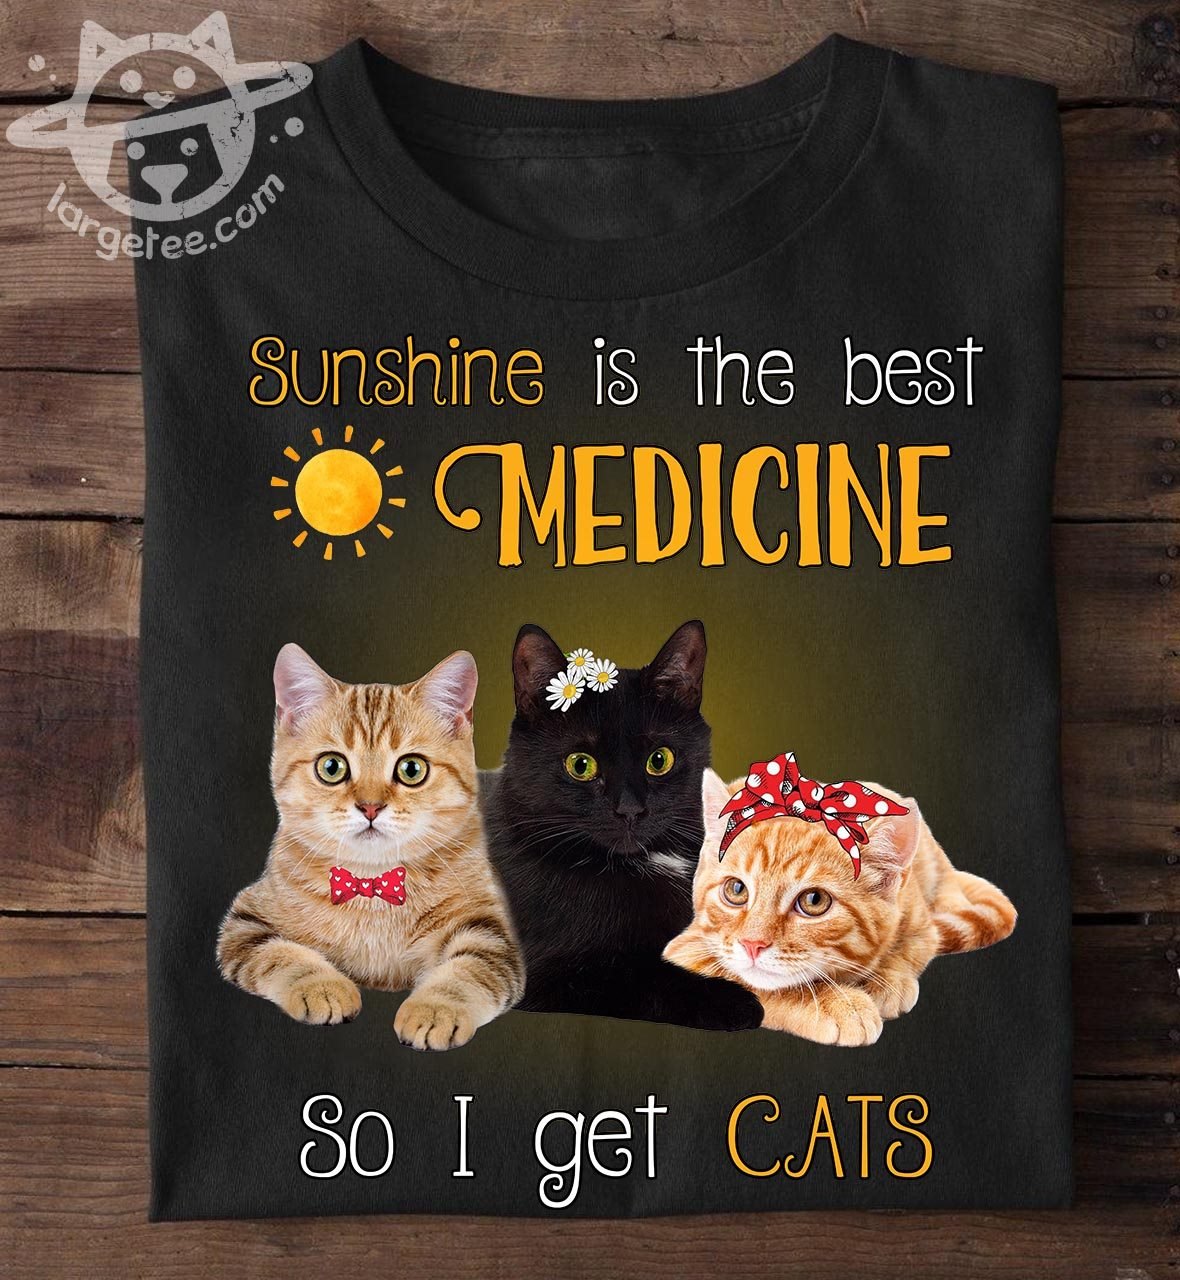 Sunshine is the best medicine so i get cats - Cat lover